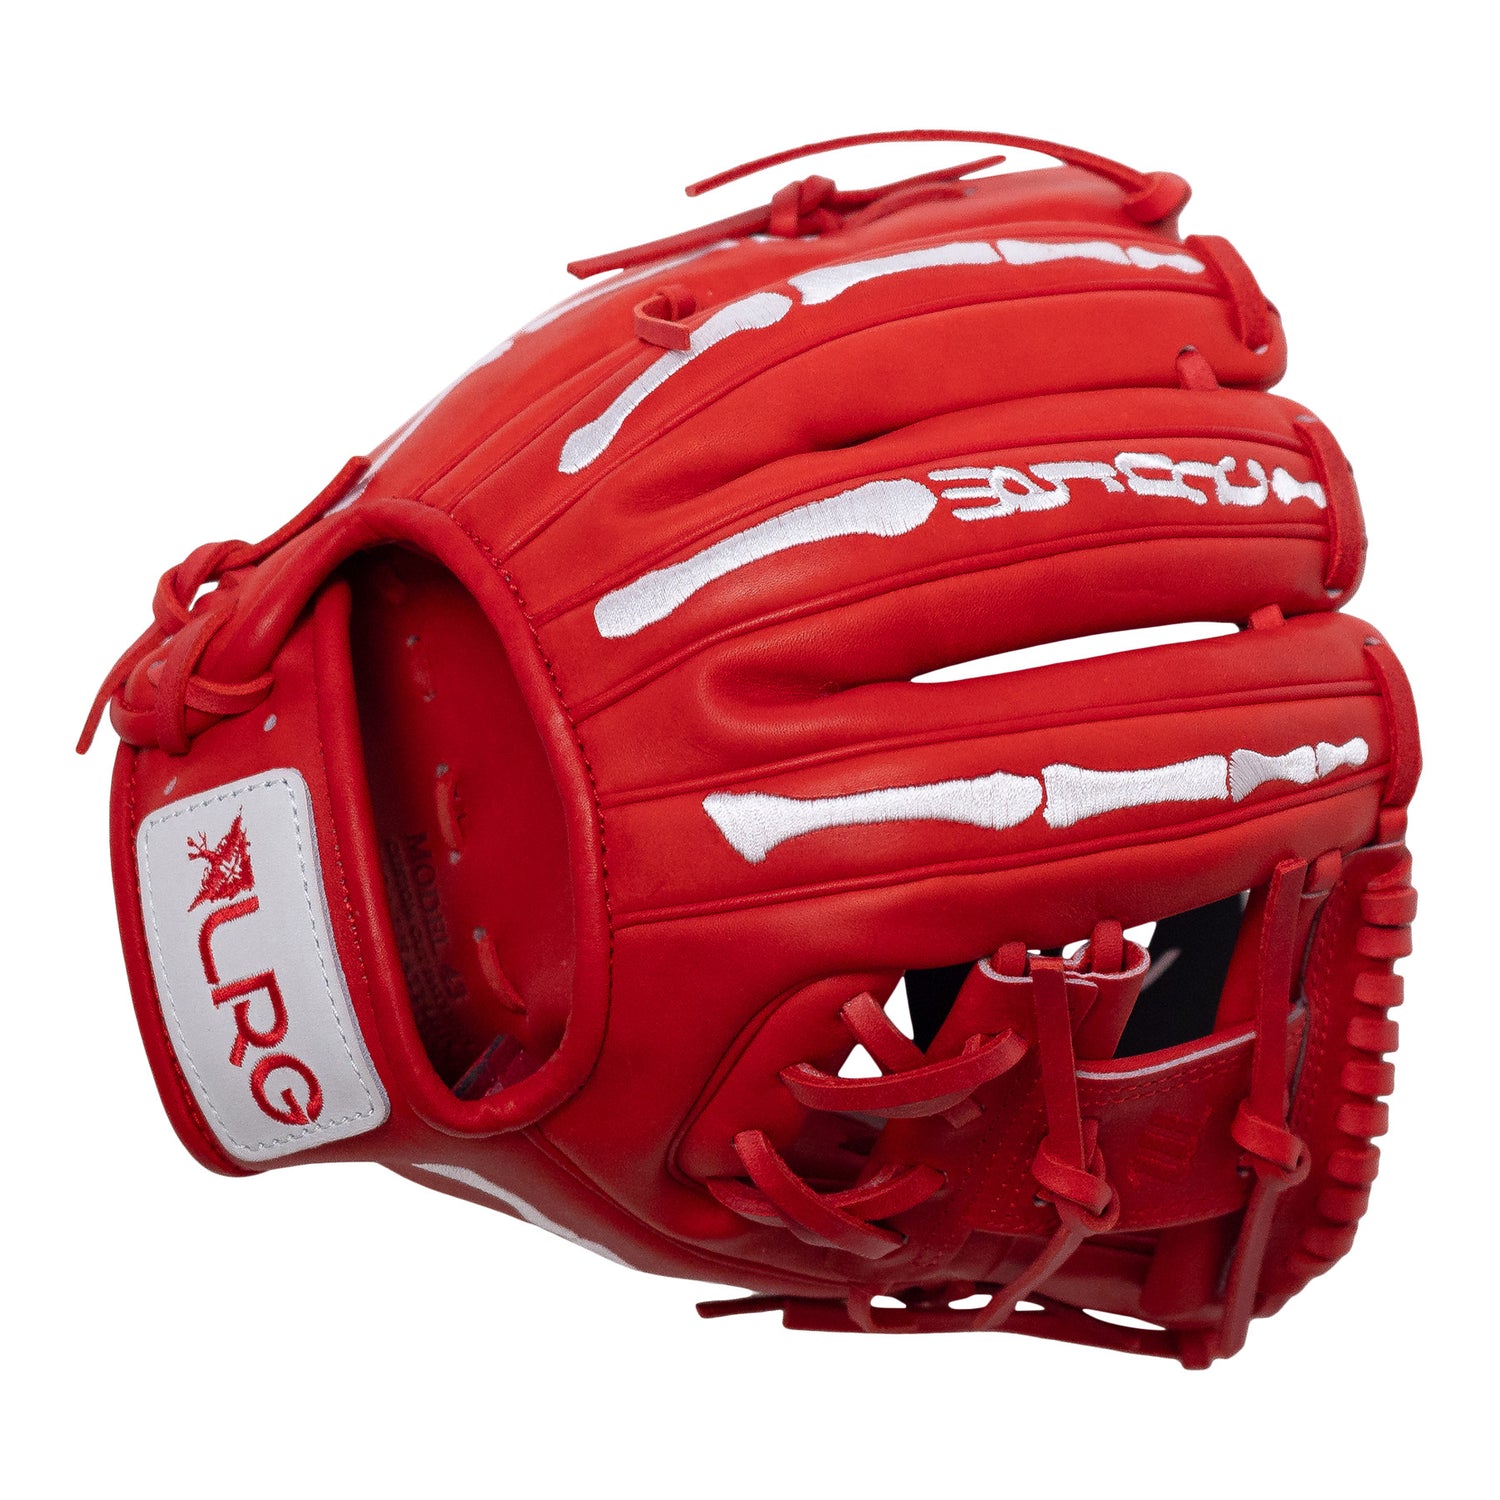 MARUCCI X LRG INFIELD RIGHT HAND THROW GLOVE - RED